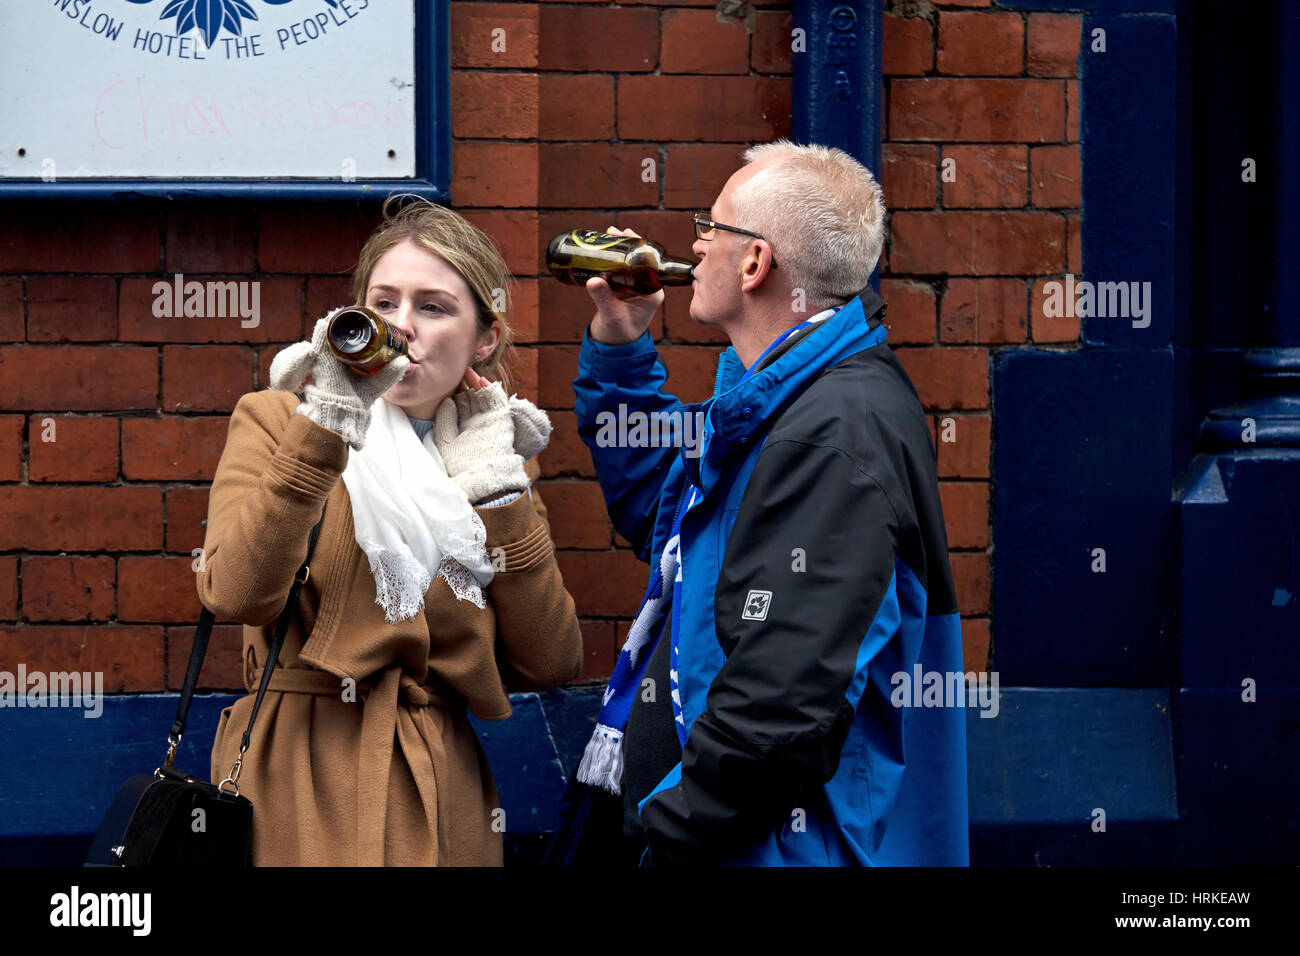 A man and woman having a drink outside a pub before going into an Everton home game at Goodison Park, Liverpool, UK Stock Photo